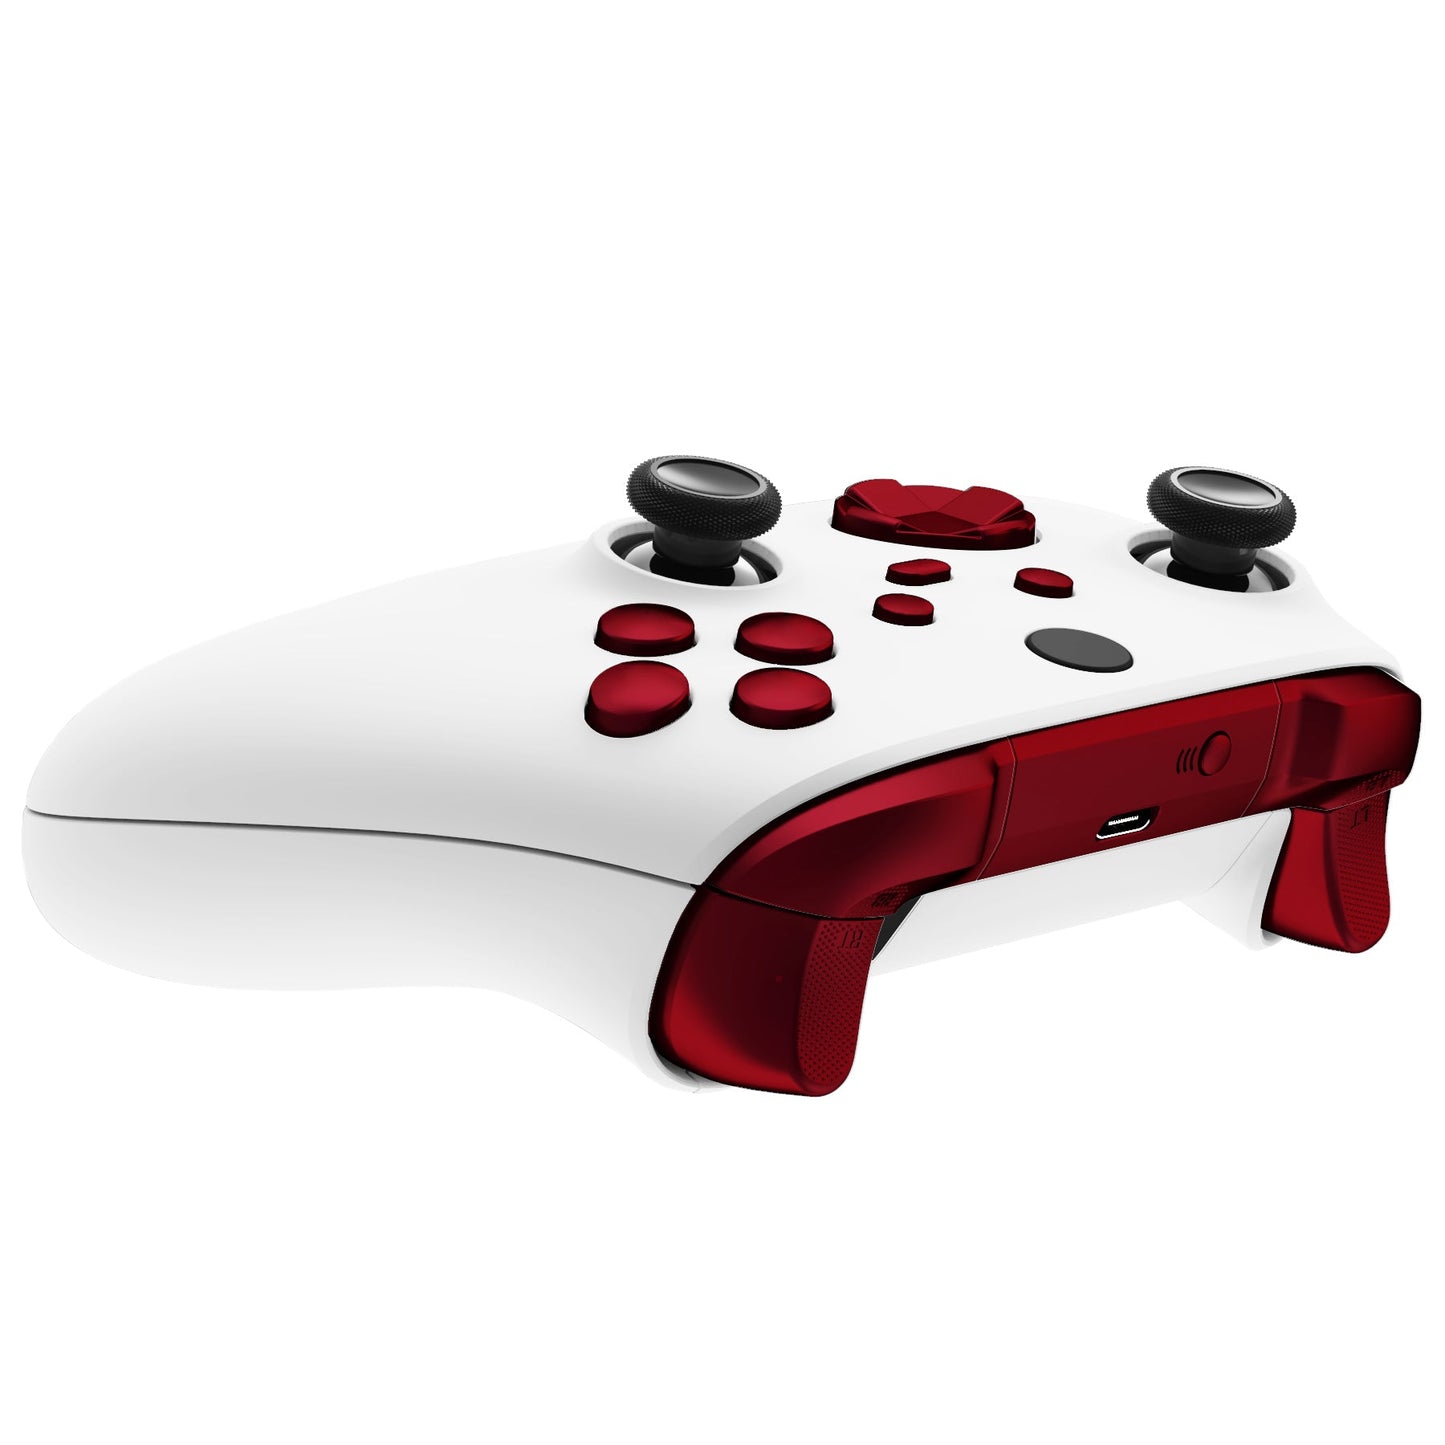 eXtremeRate Retail No Letter Imprint Custom Full Set Buttons for Xbox Series X/S Controller, Scarlet Red Replacement Accessories Bumpers Triggers Dpad ABXY Buttons for Xbox Series X/S, Xbox Core Controller - JX3503